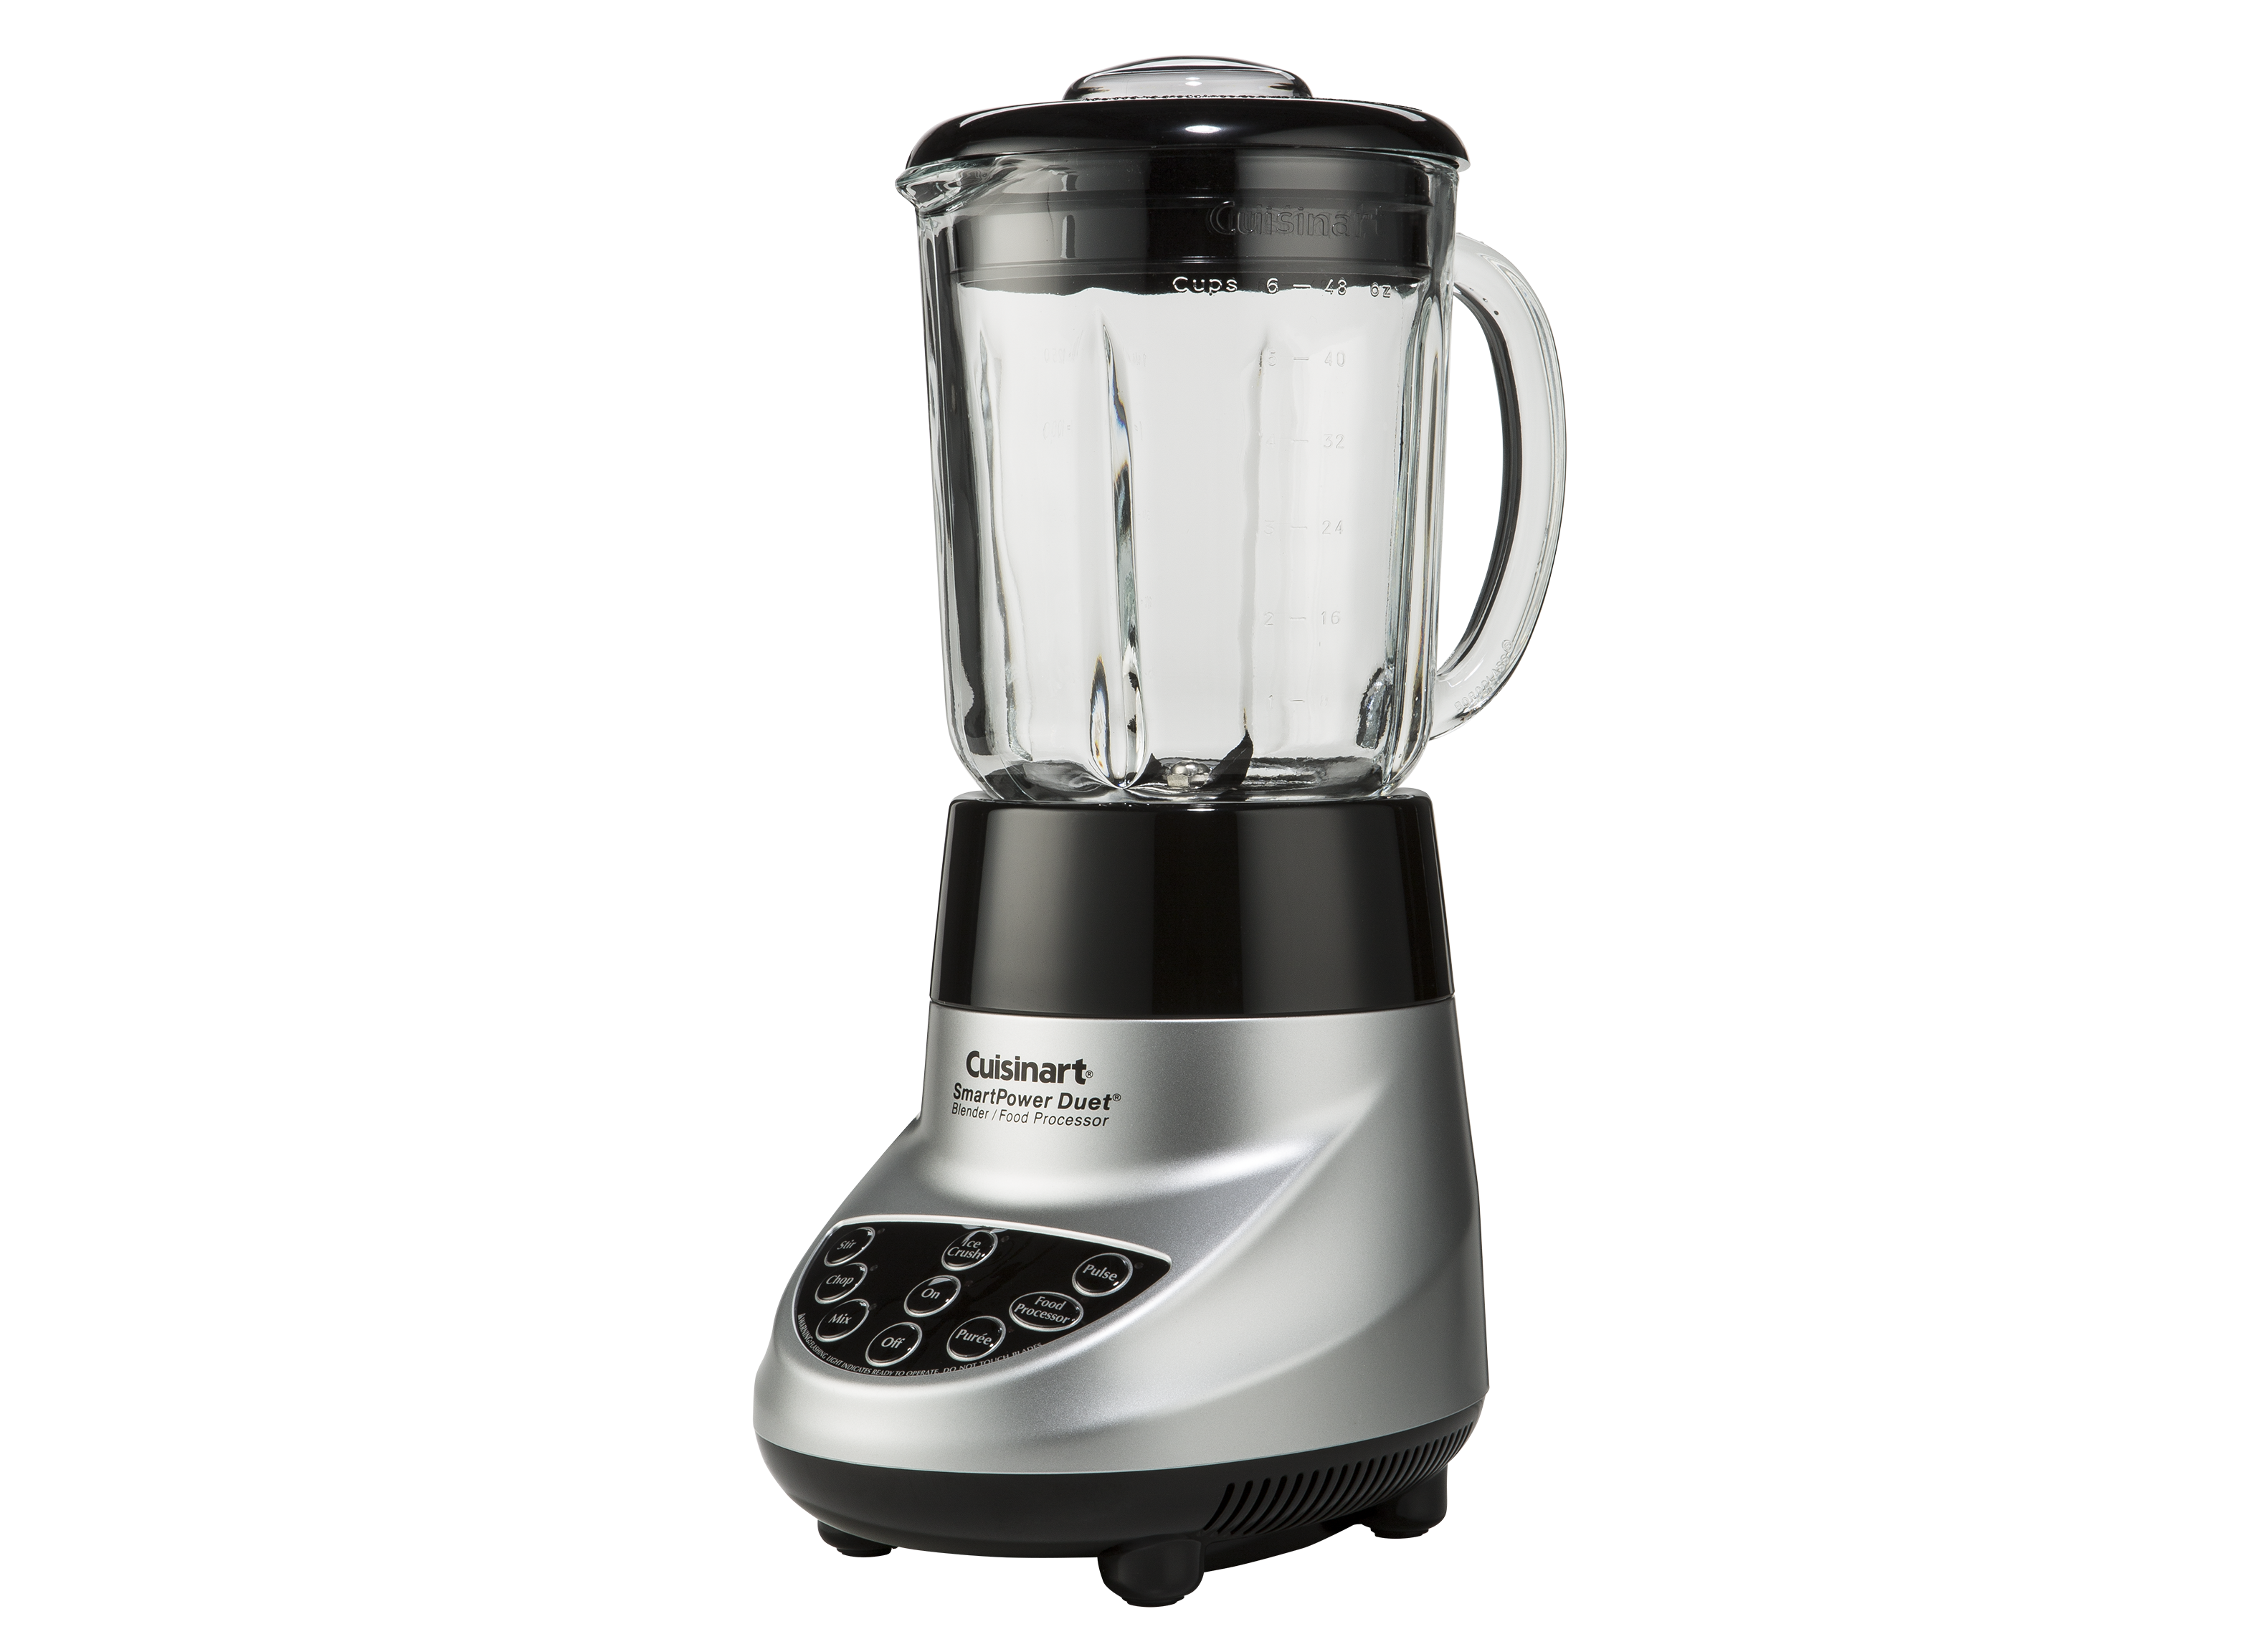 Cuisinart BFP-703CH SmartPower Duet Blender and Food Processor, Chrome  DISCONTINUED BY MANUFACTURER